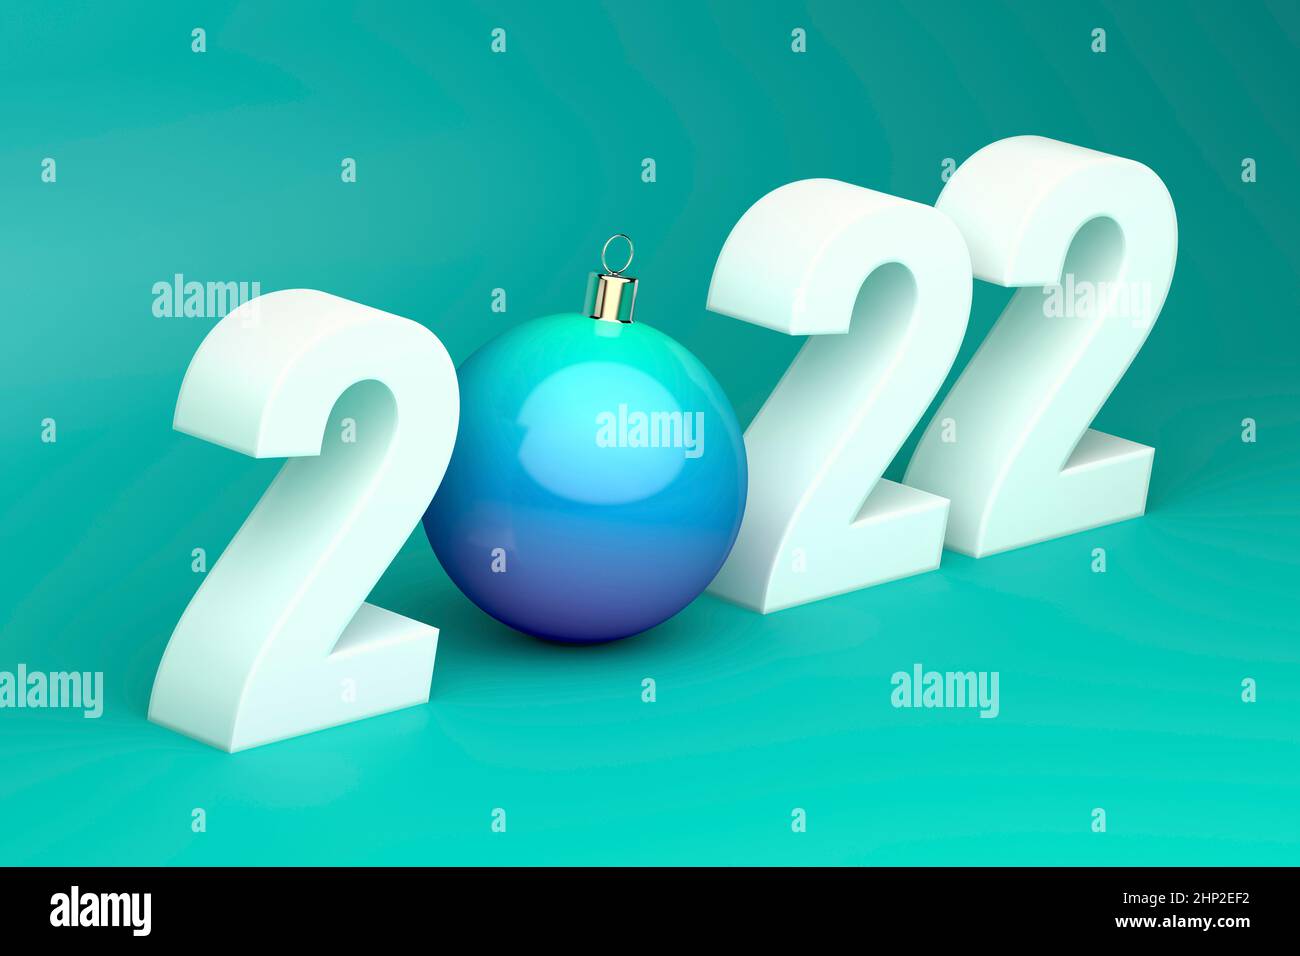 Happy new year 2022, greeting card Stock Photo